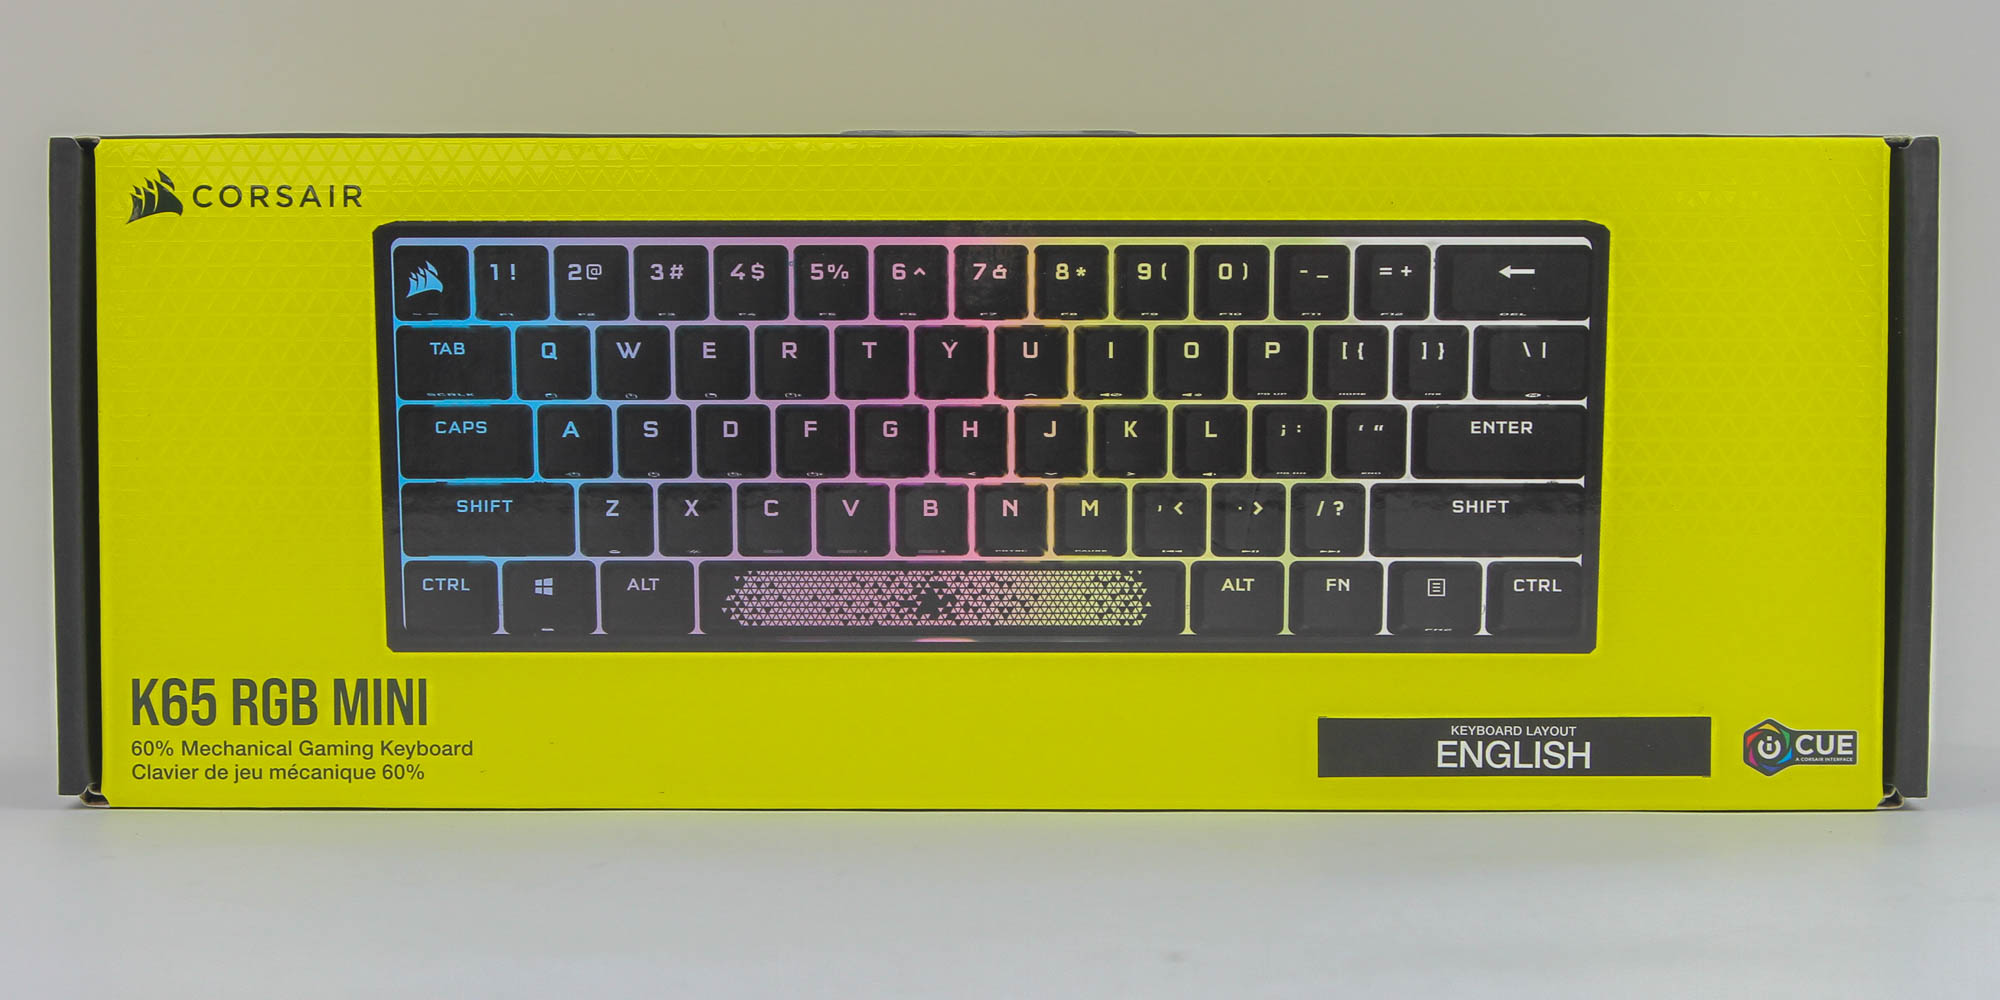 CORSAIR K65 RGB MINI (Updated) Review - Goes - Packaging & Accessories | TechPowerUp